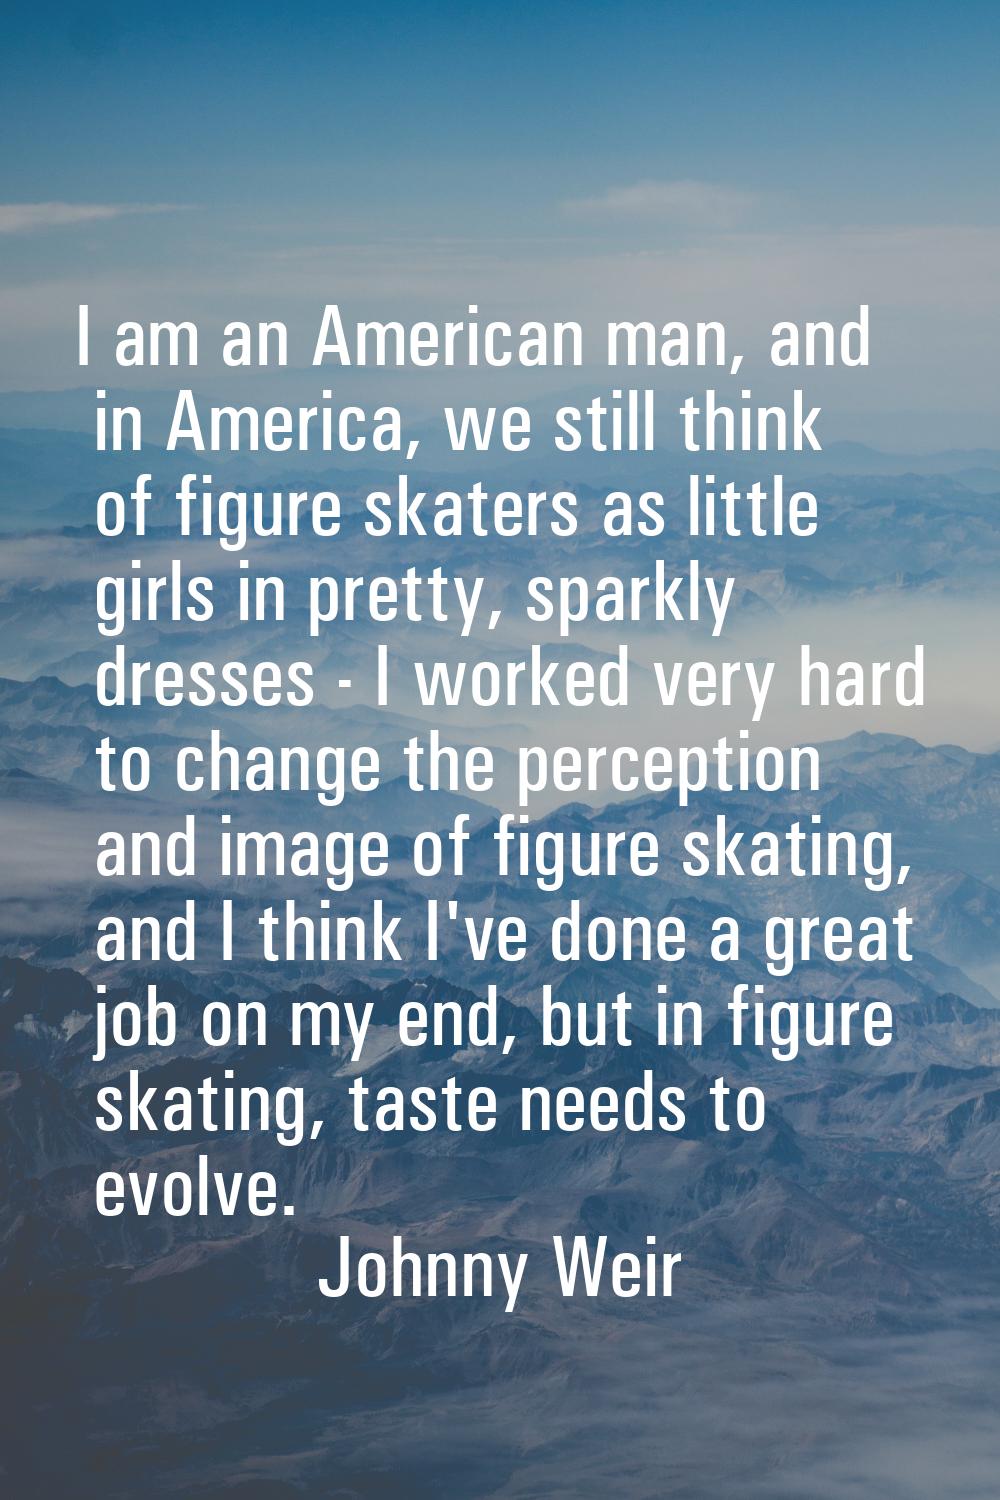 I am an American man, and in America, we still think of figure skaters as little girls in pretty, s